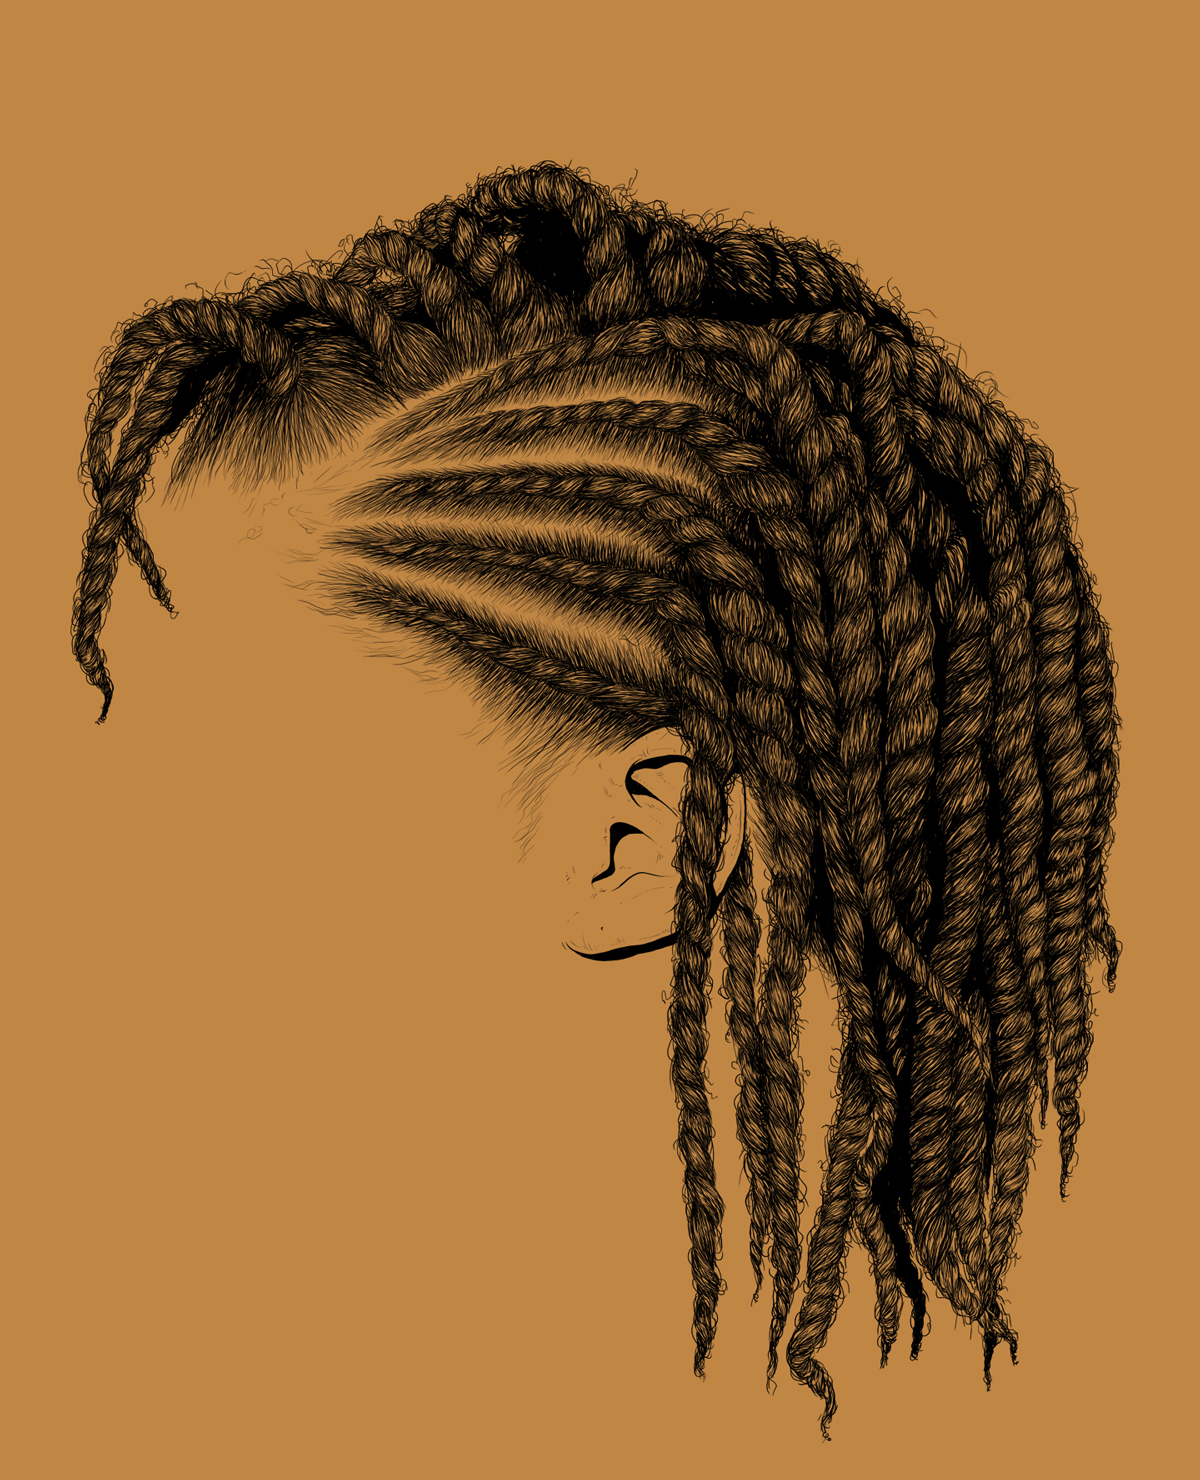 detail, hair, draw, illustrate, vectorize